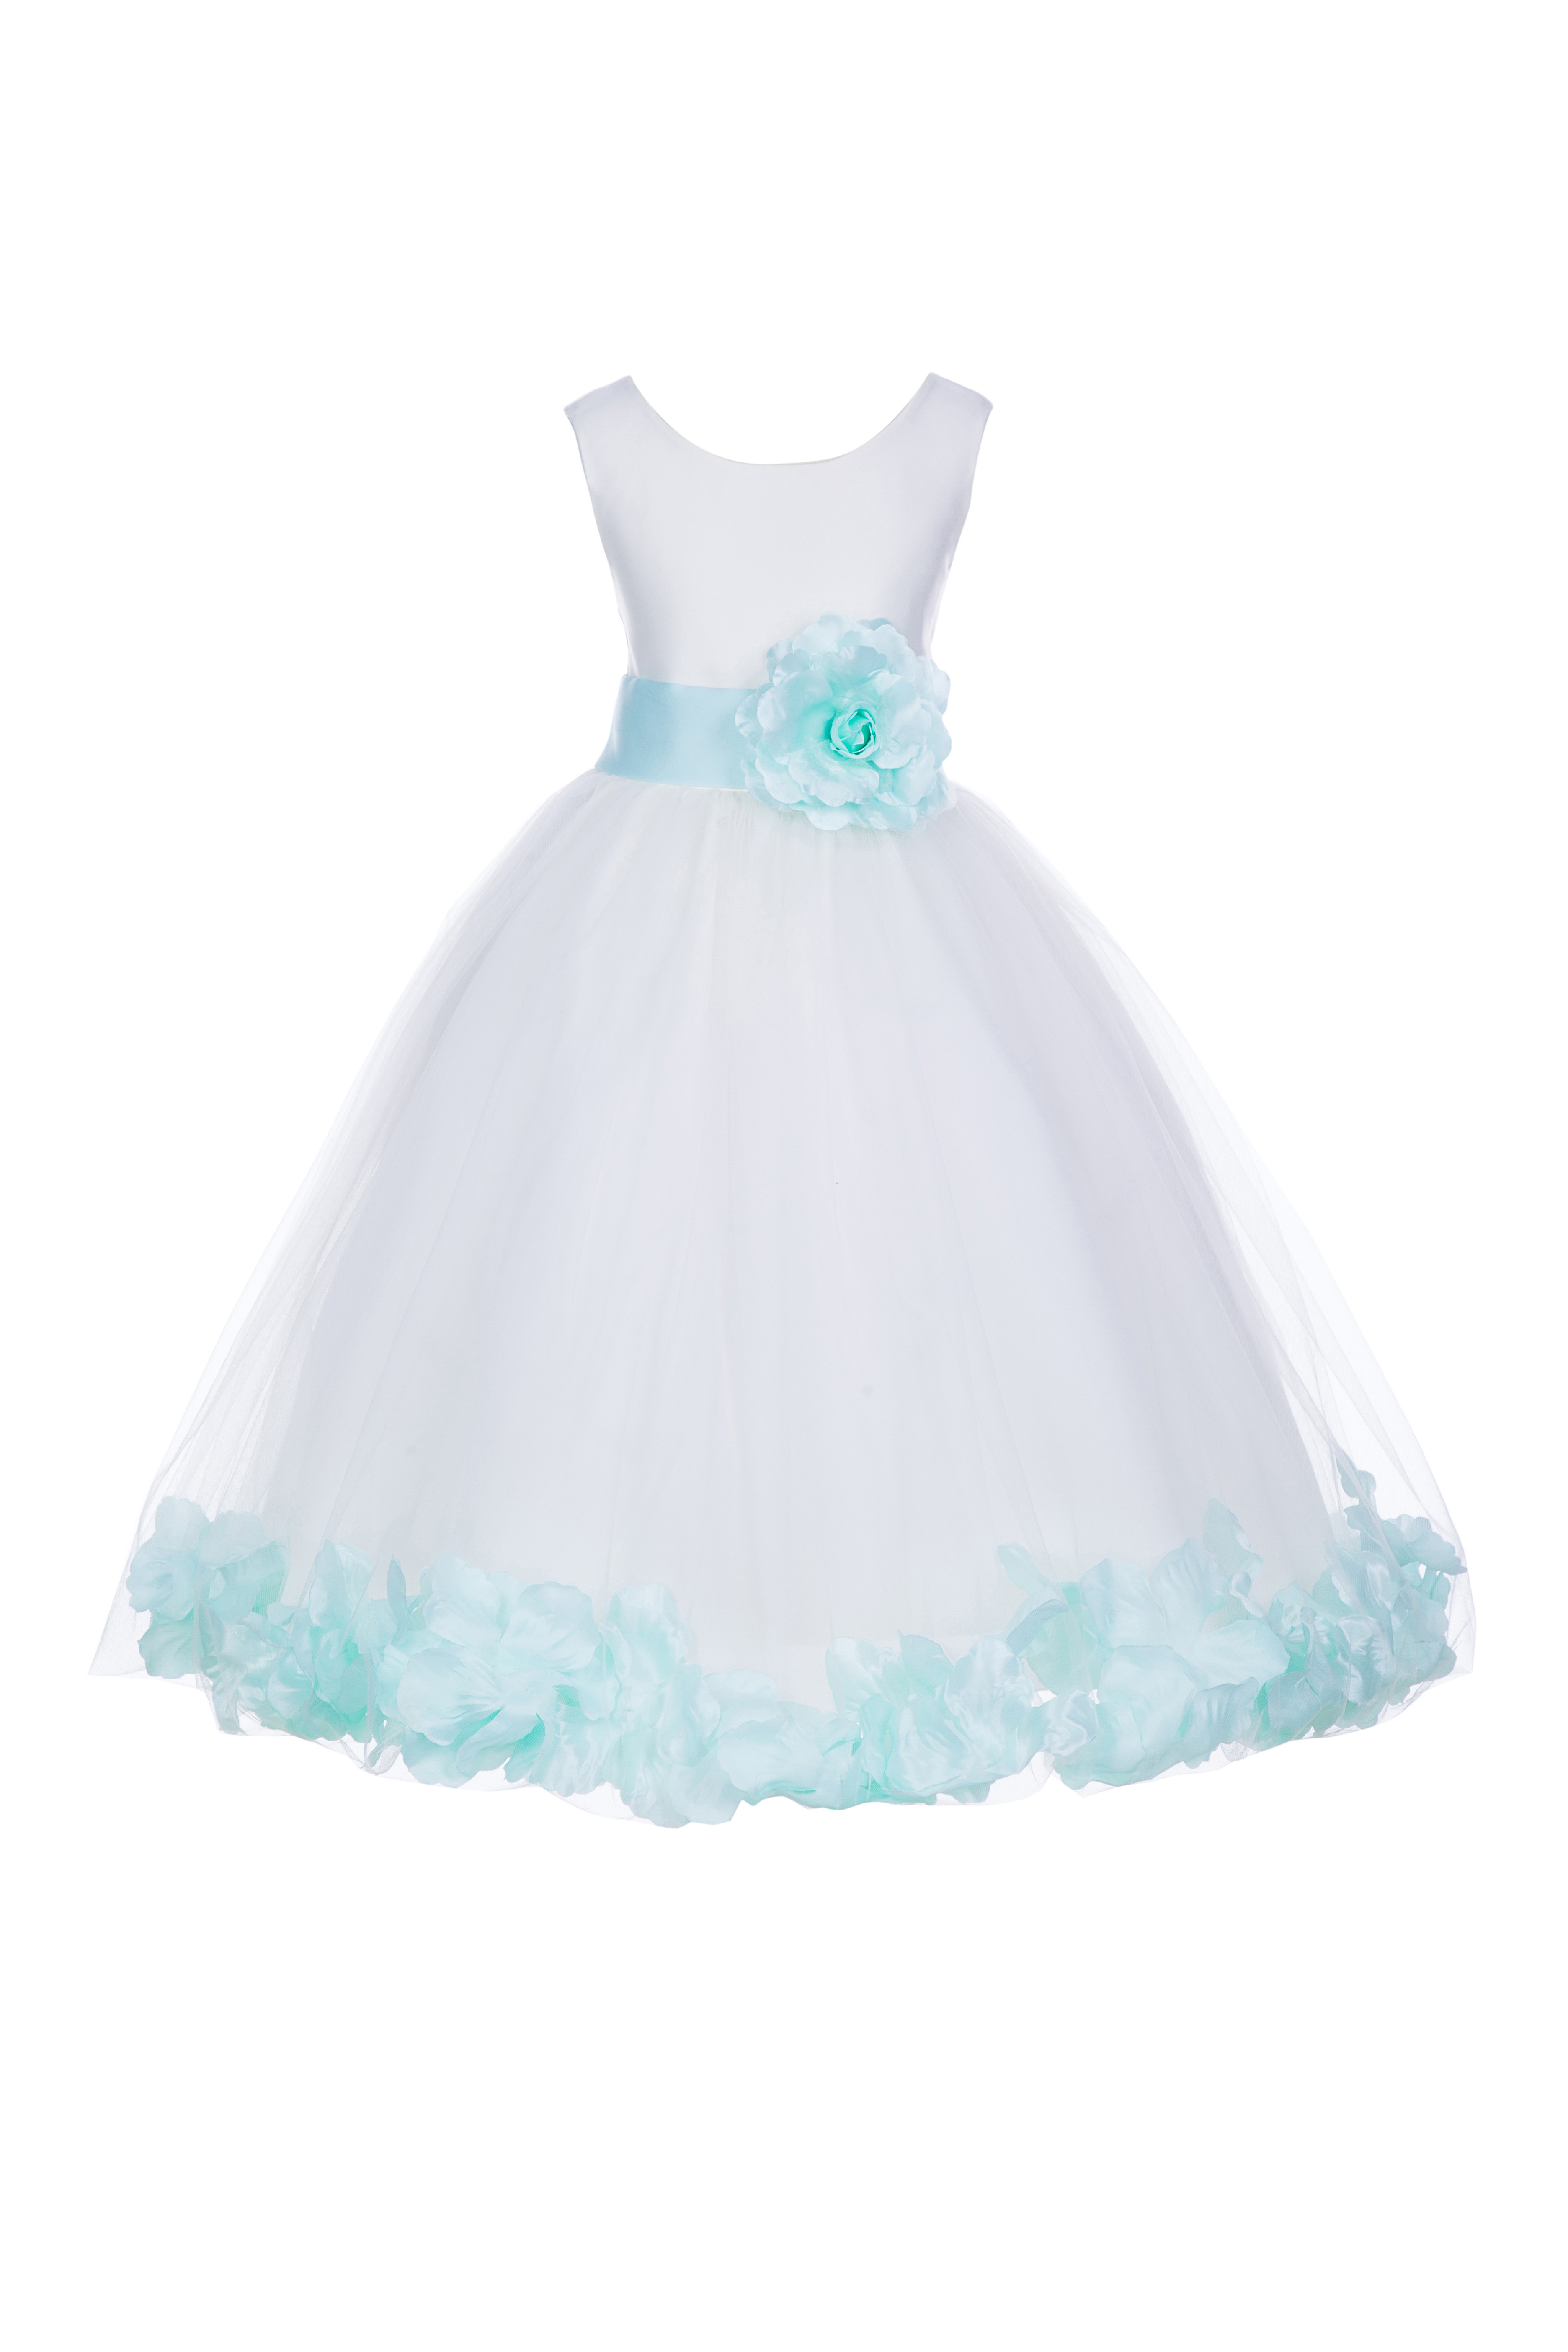 Ivory/Mint Tulle Rose Petals Flower Girl Dress Pageant 302S